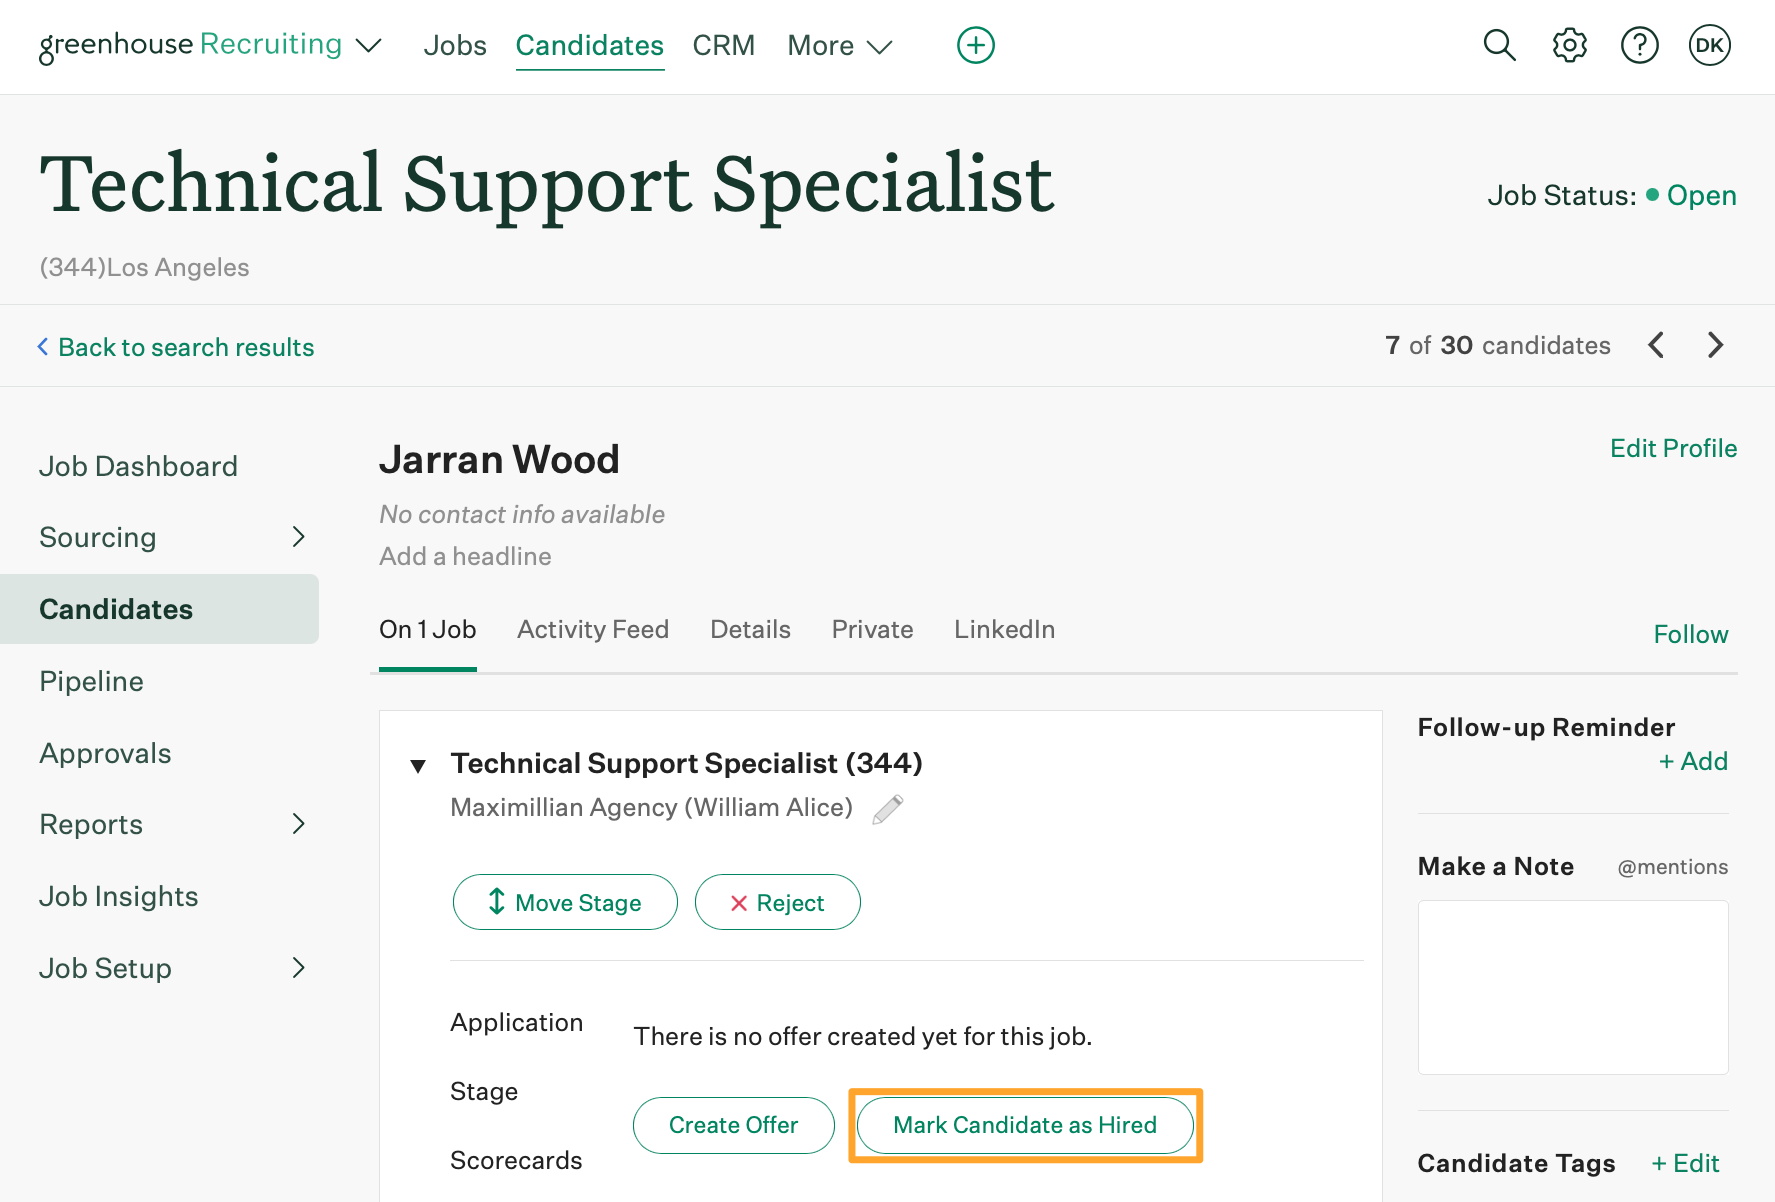 A candidate named Jarran Wood is shown on the Technical Support Specialist job with Mark Candidate as Hired highlighted in marigold